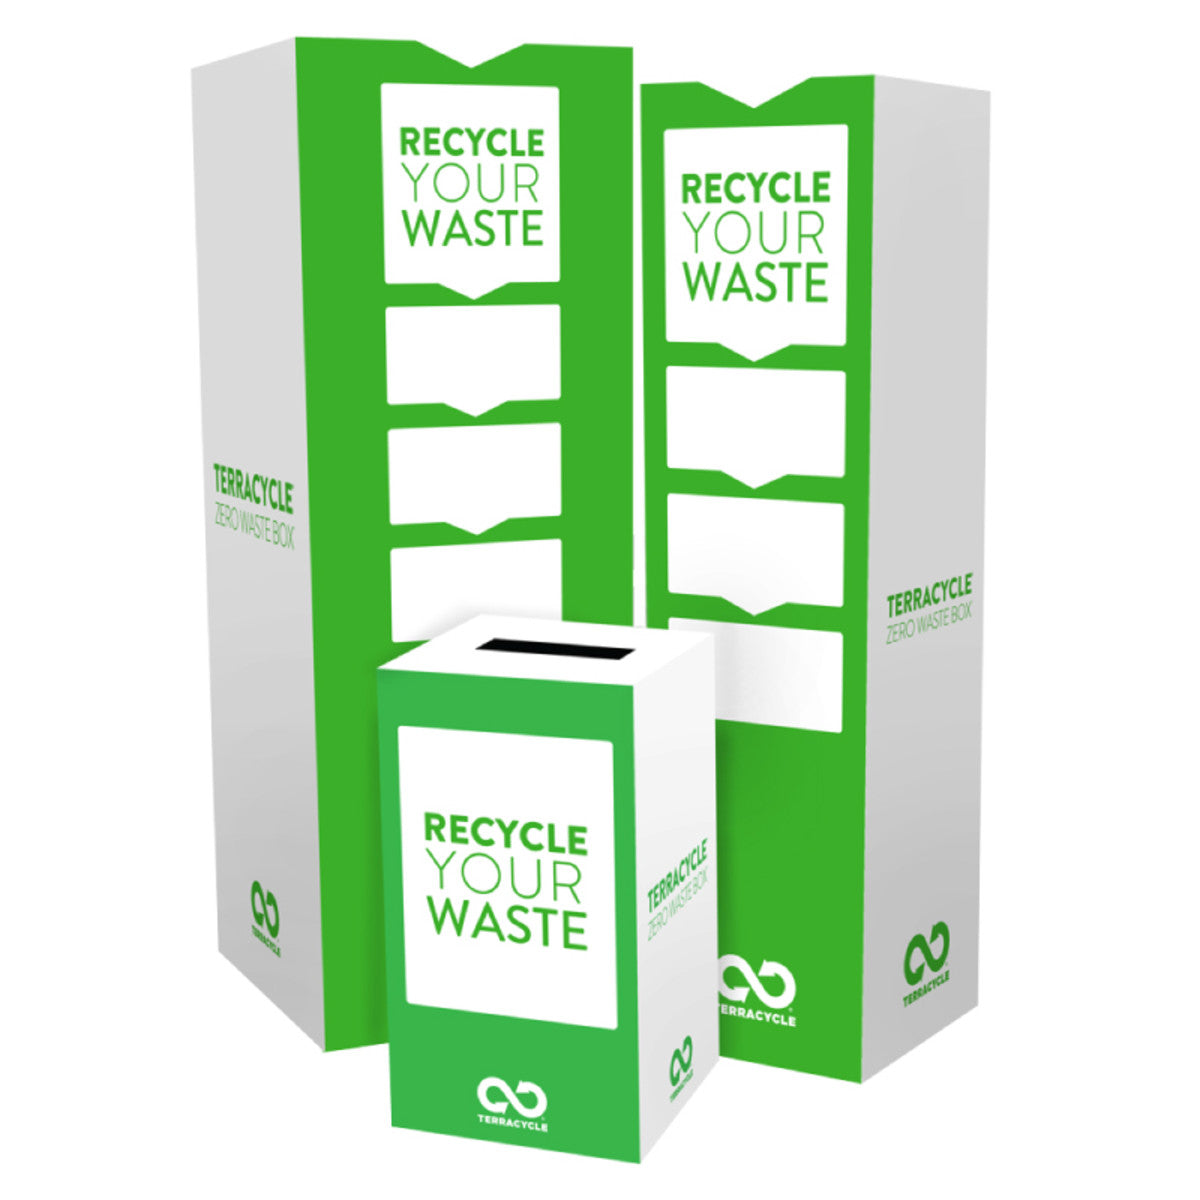 Recycle shipping materials  Zero Waste Box™ by TerraCycle - US